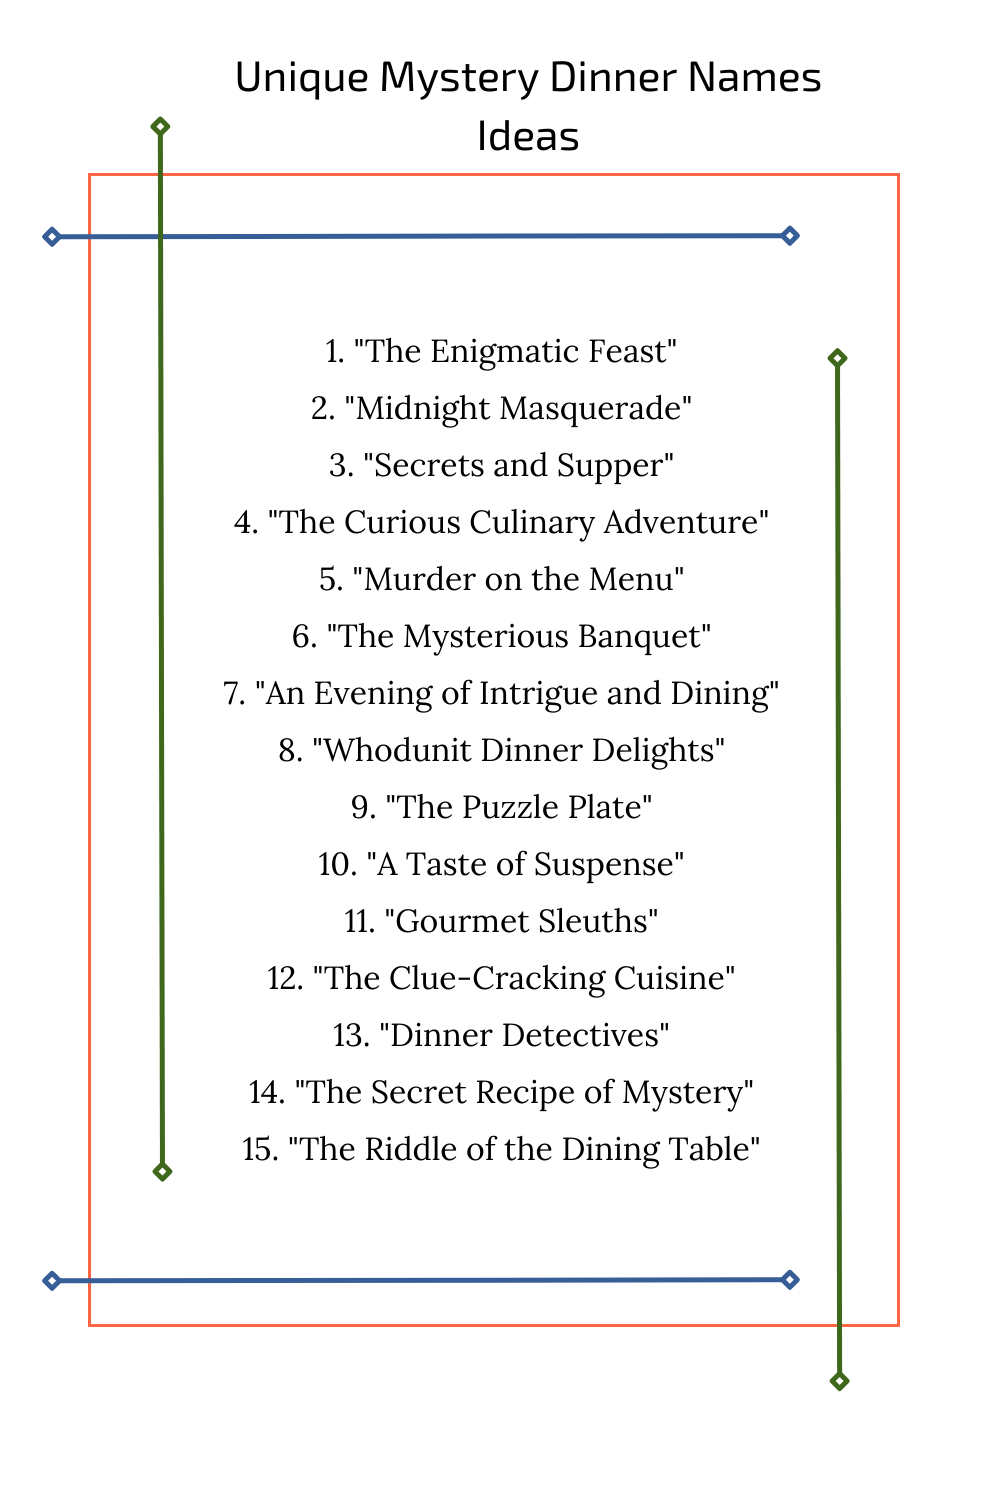 Unique Mystery Dinner Names Ideas